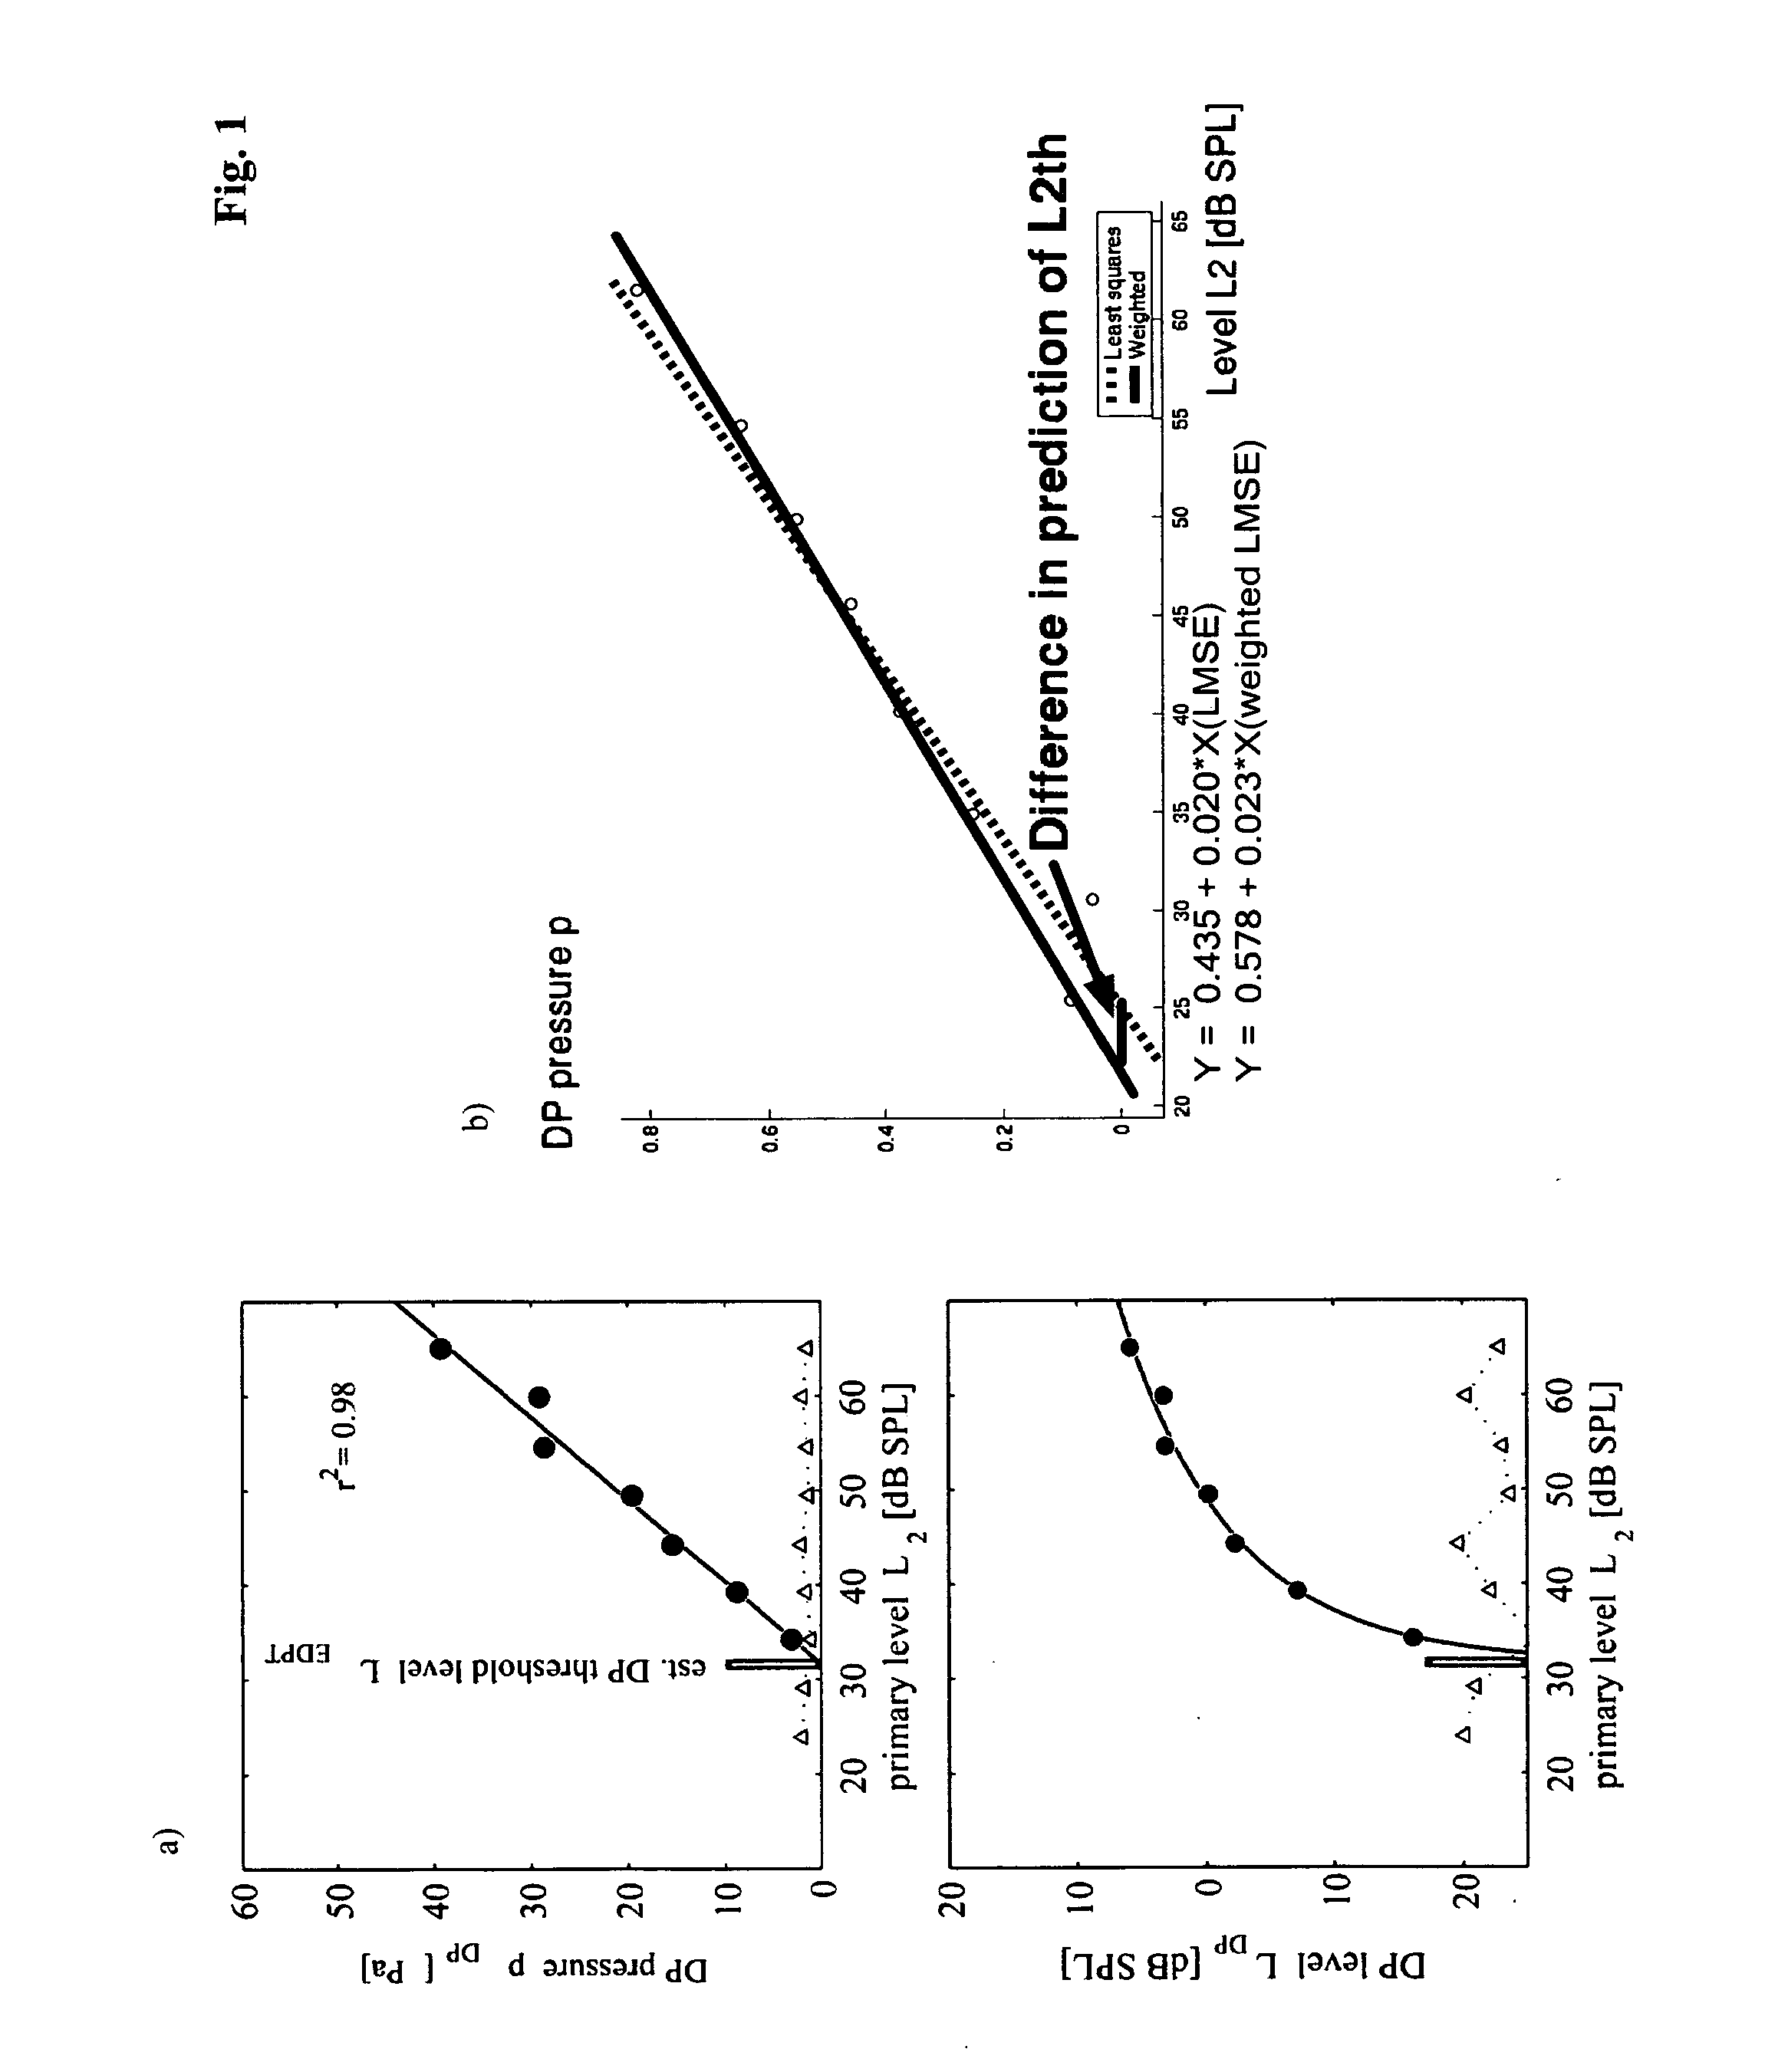 Method and apparatus for automatic non-cooperative frequency specific assessment of hearing impairment and fitting of hearing aids